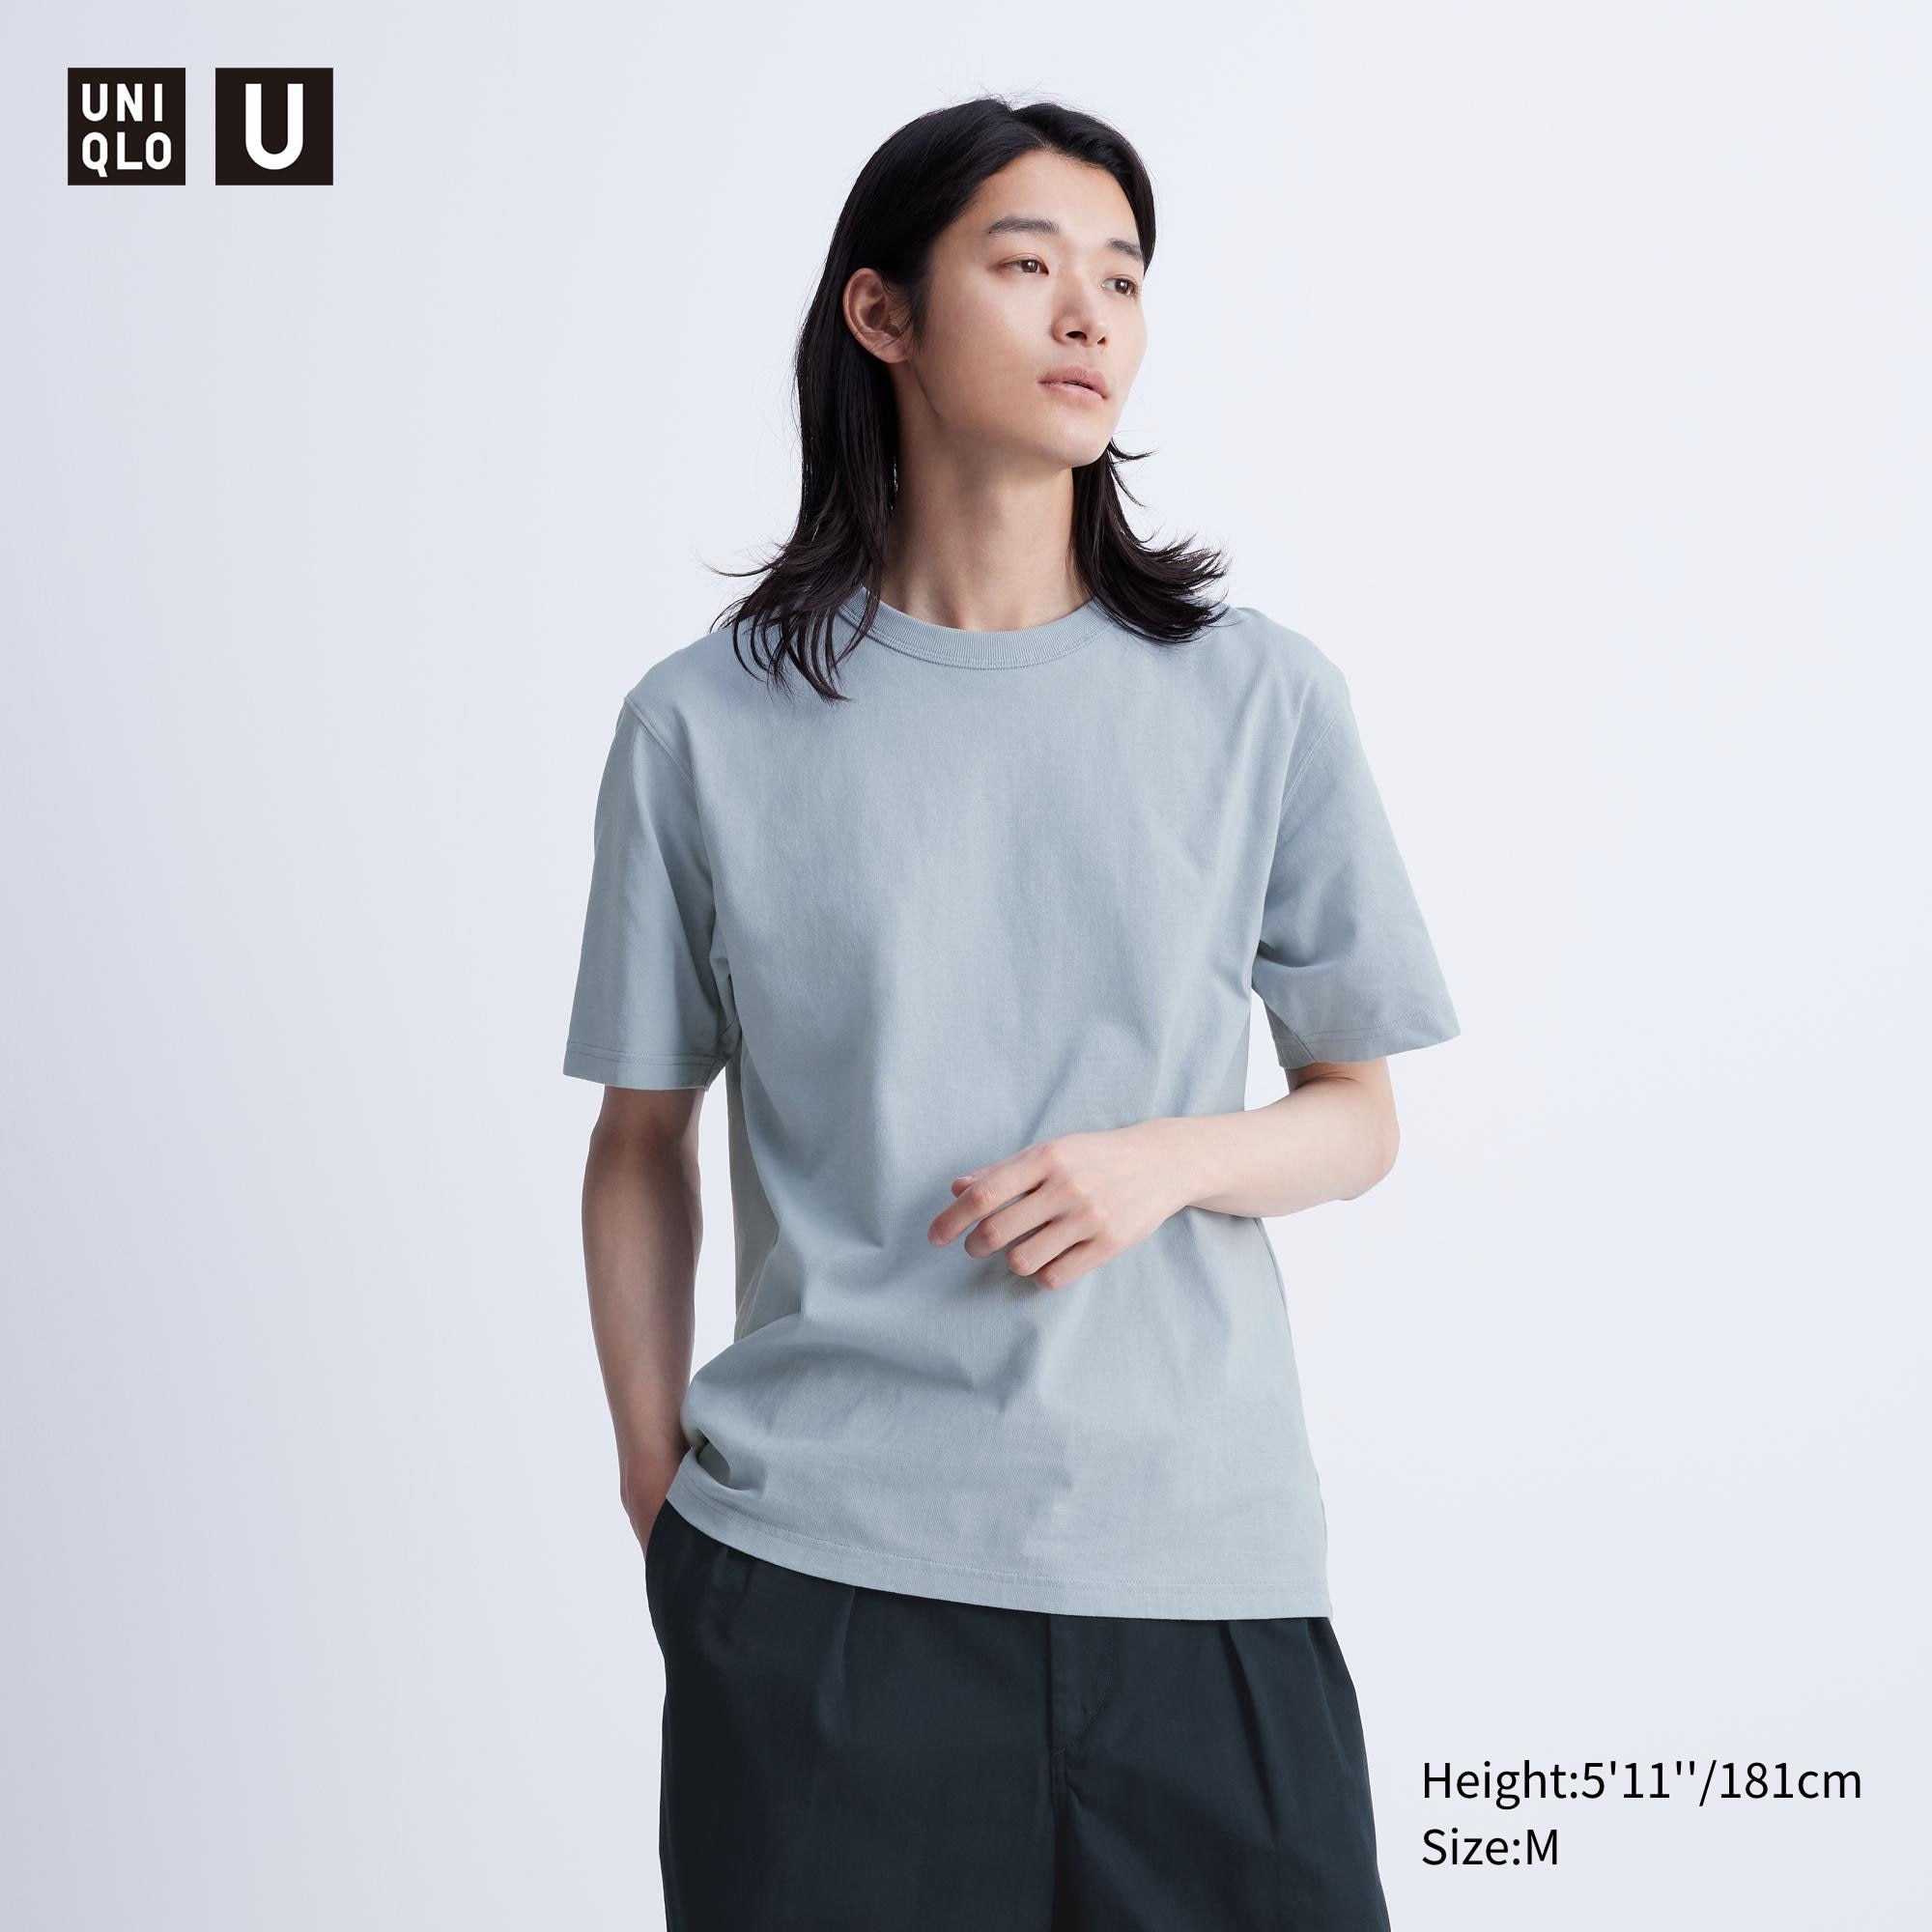 Stuff We Swear By: These $20 Uniqlo Pants Come In Every Color